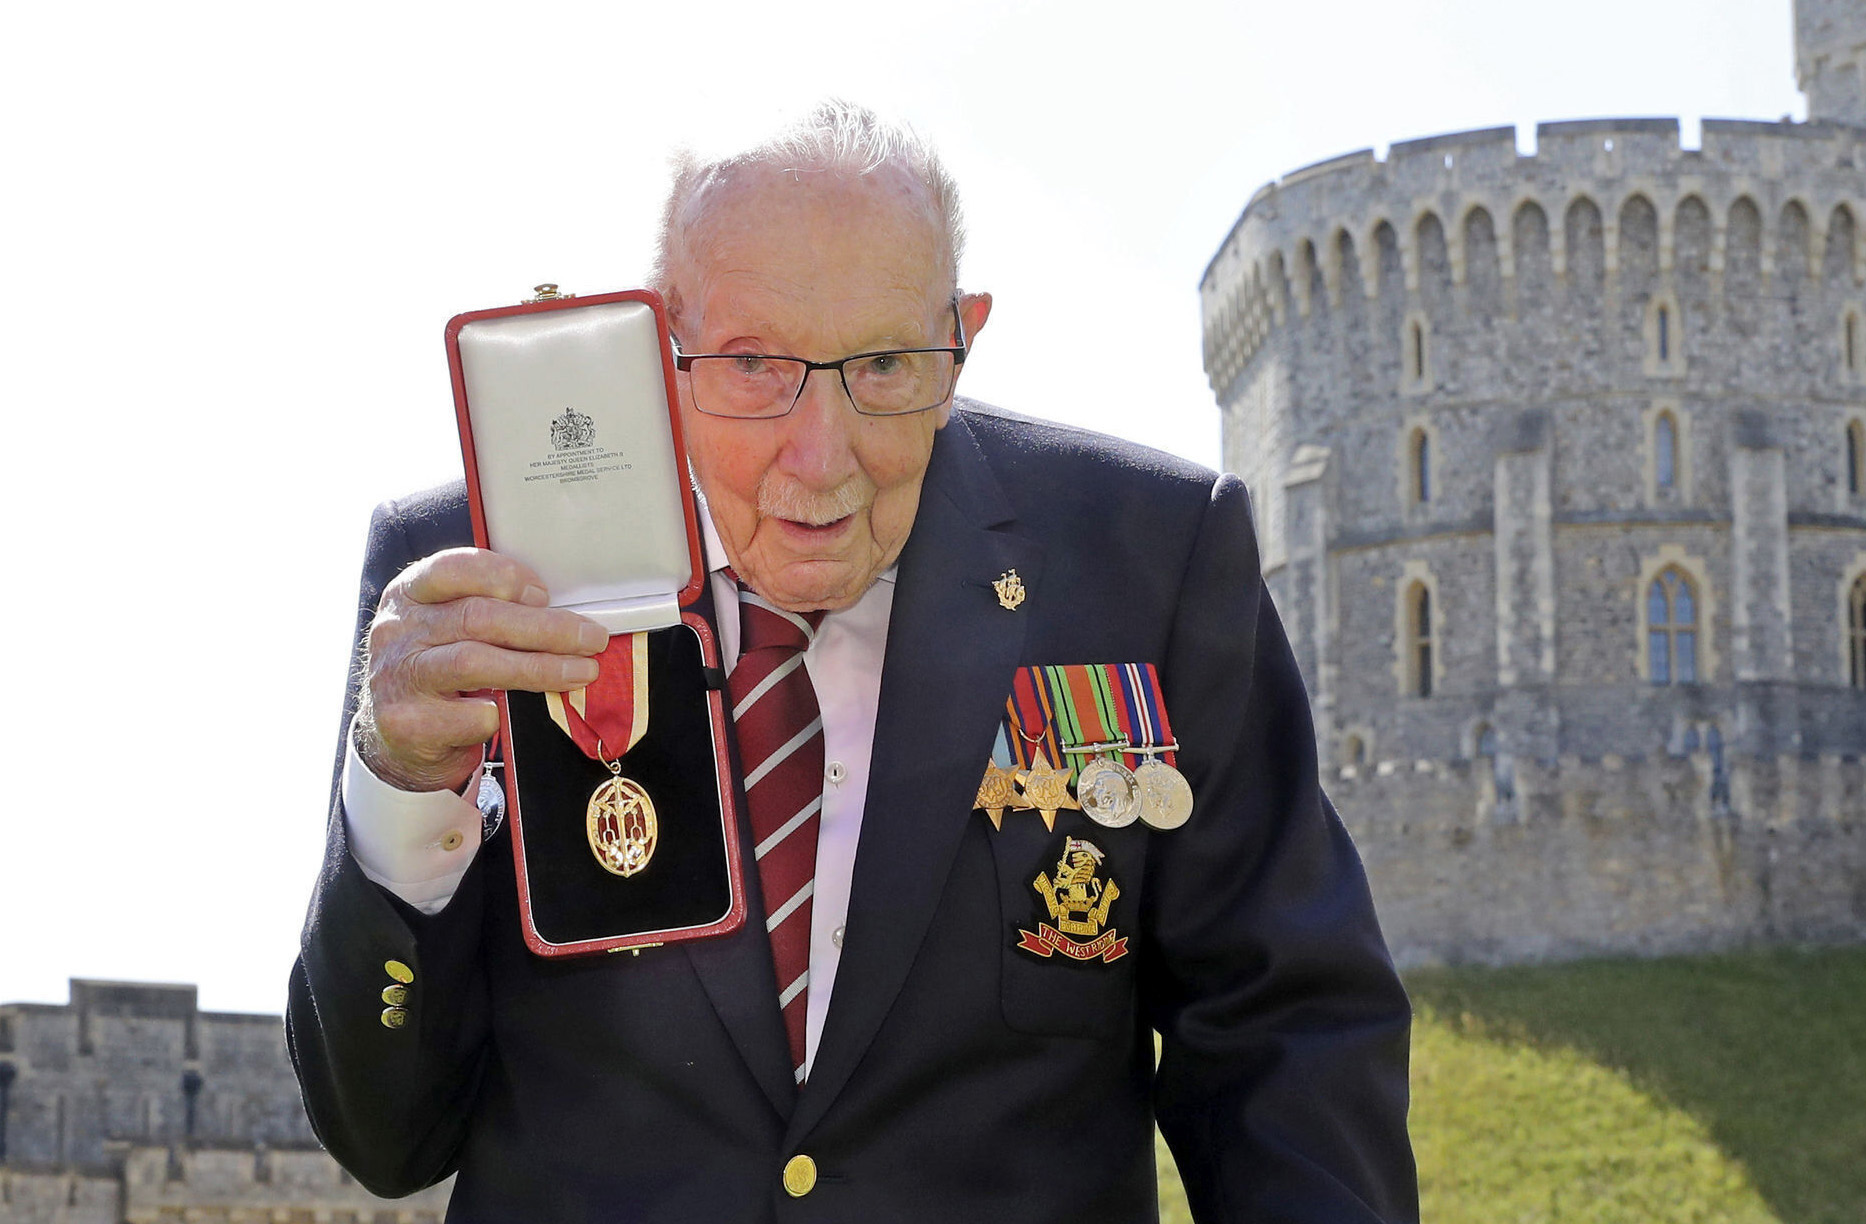 PHOTO: Captain Sir Thomas Moore poses for the media after receiving his knighthood from Britain's Queen Elizabeth, during a ceremony at Windsor Castle in Windsor, England.